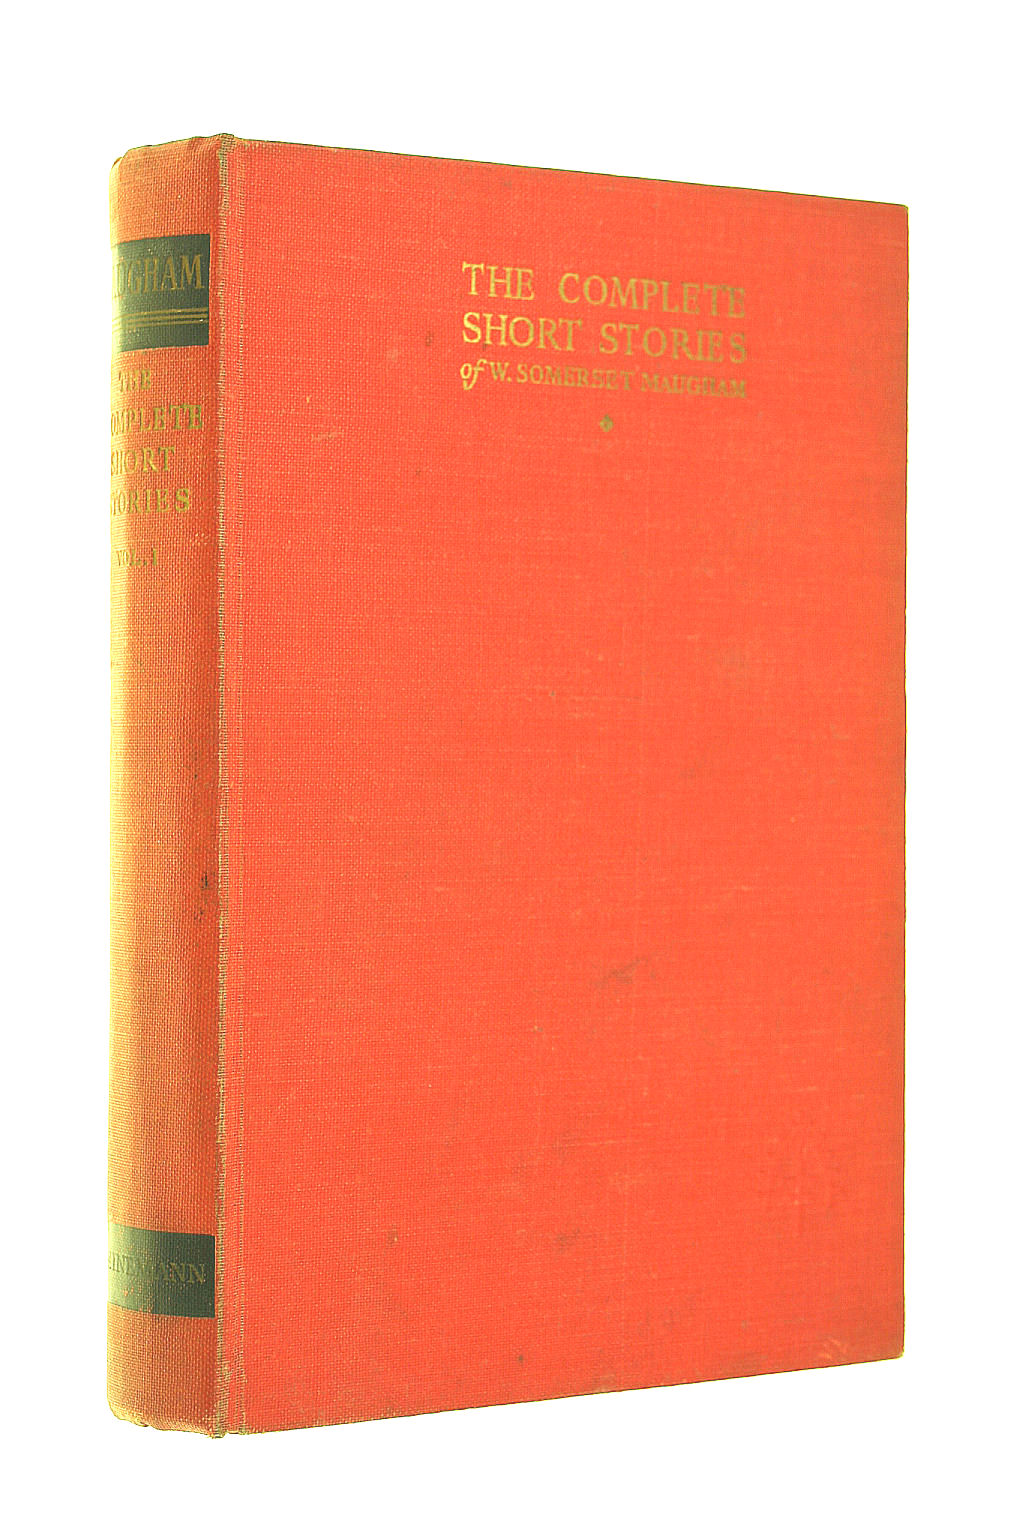 SOMERSET MAUGHAM, W. - The Complete Short Stories: Volume 1